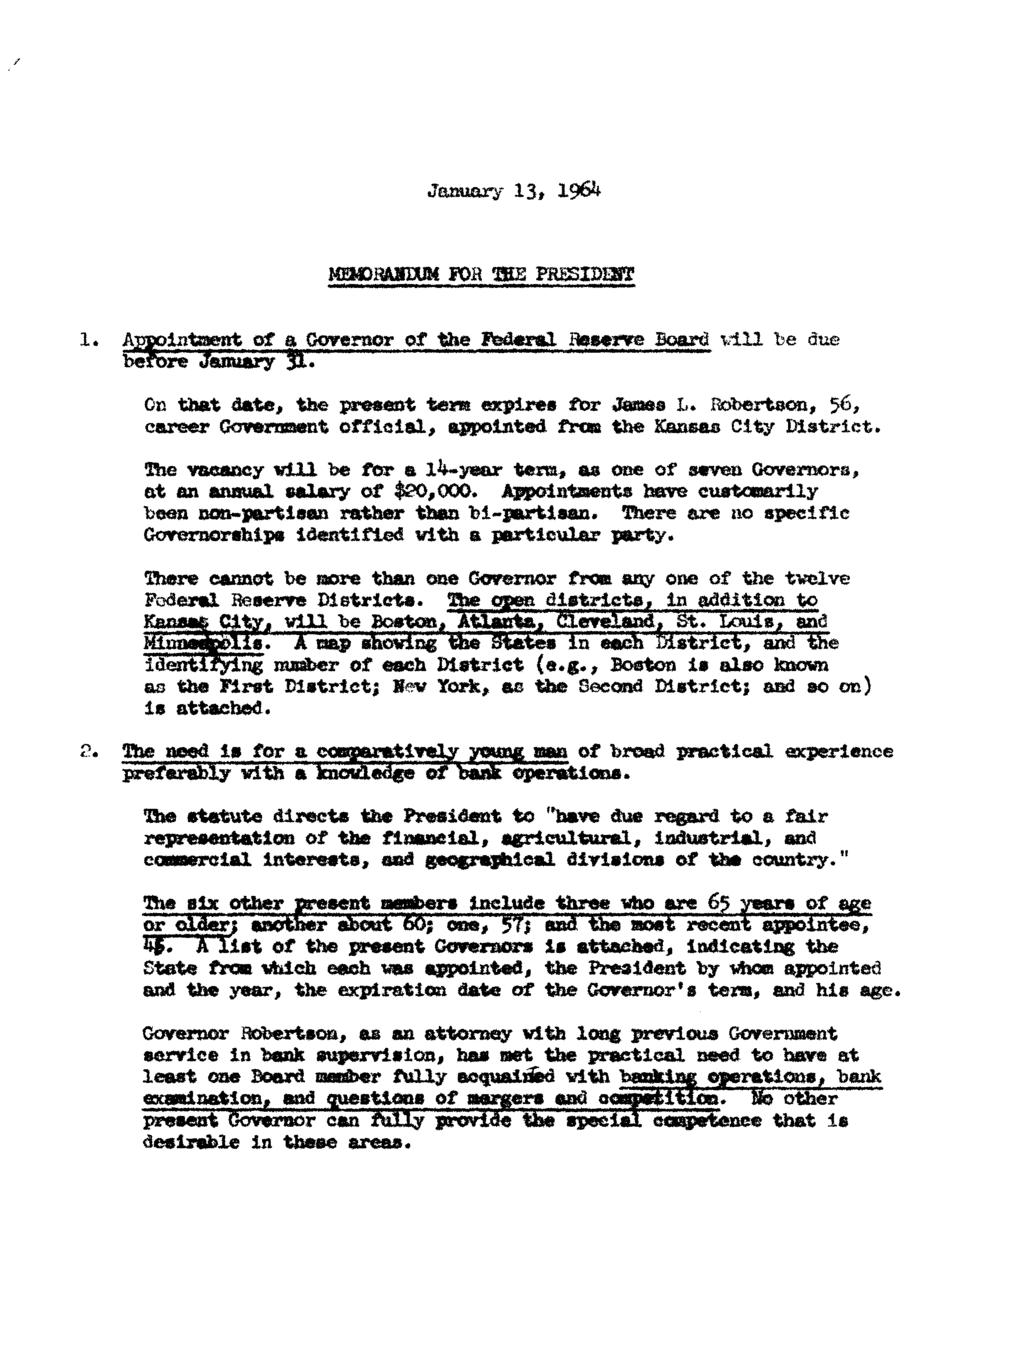 January 13, 1964 MEMORANDUM FOR THE PRESIDENT 1. Appointment of a Governor of the Federal Reserve Board will be due before January 31. On that date, the present term expires for James L.